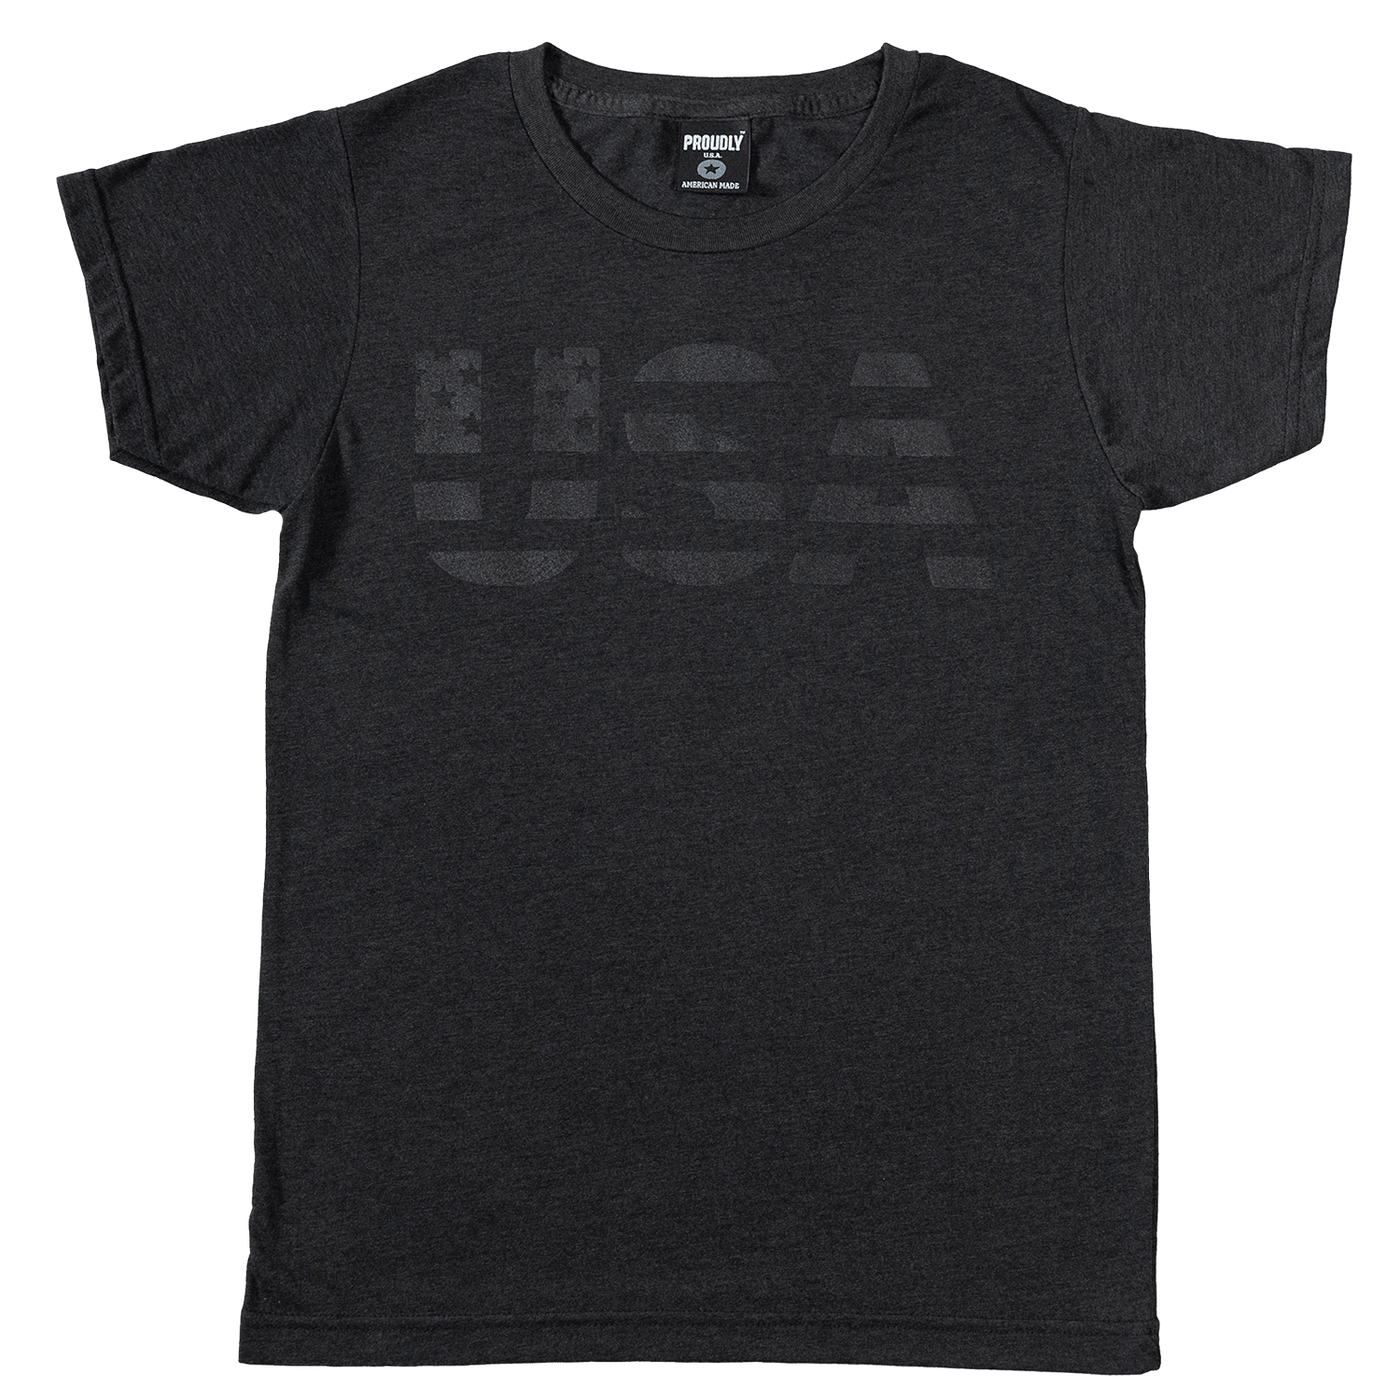 Women's heather black tri-blend t-shirt with subtle black-on-black USA graphic on chest